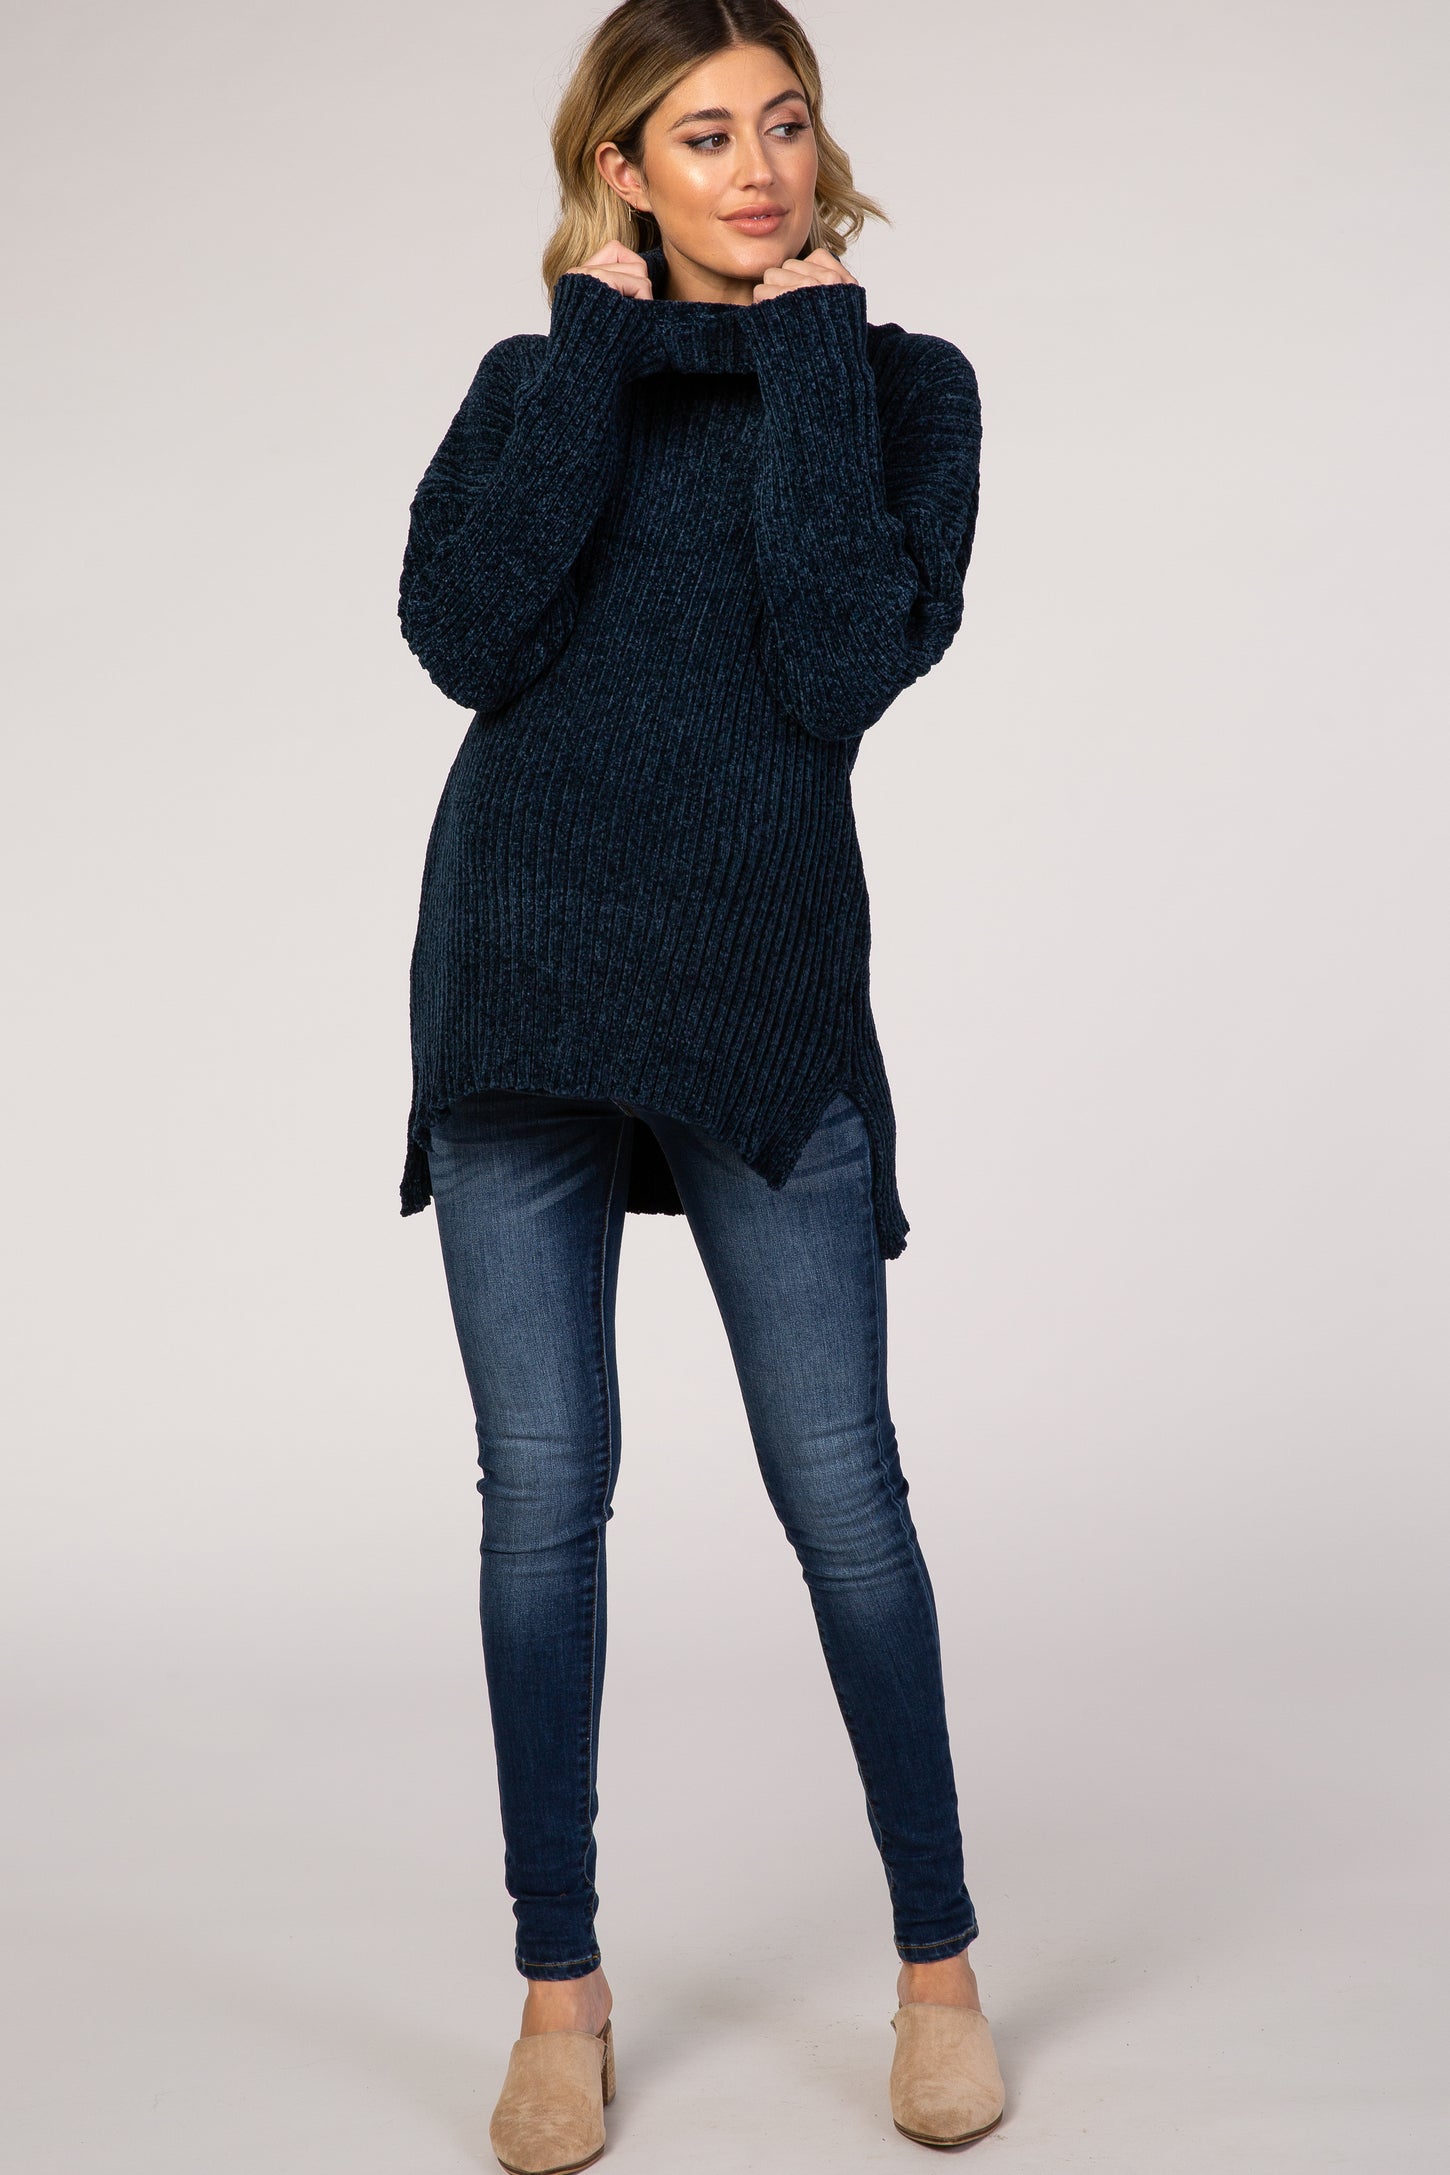 Navy Blue Ribbed Chenille Turtleneck Maternity Sweater